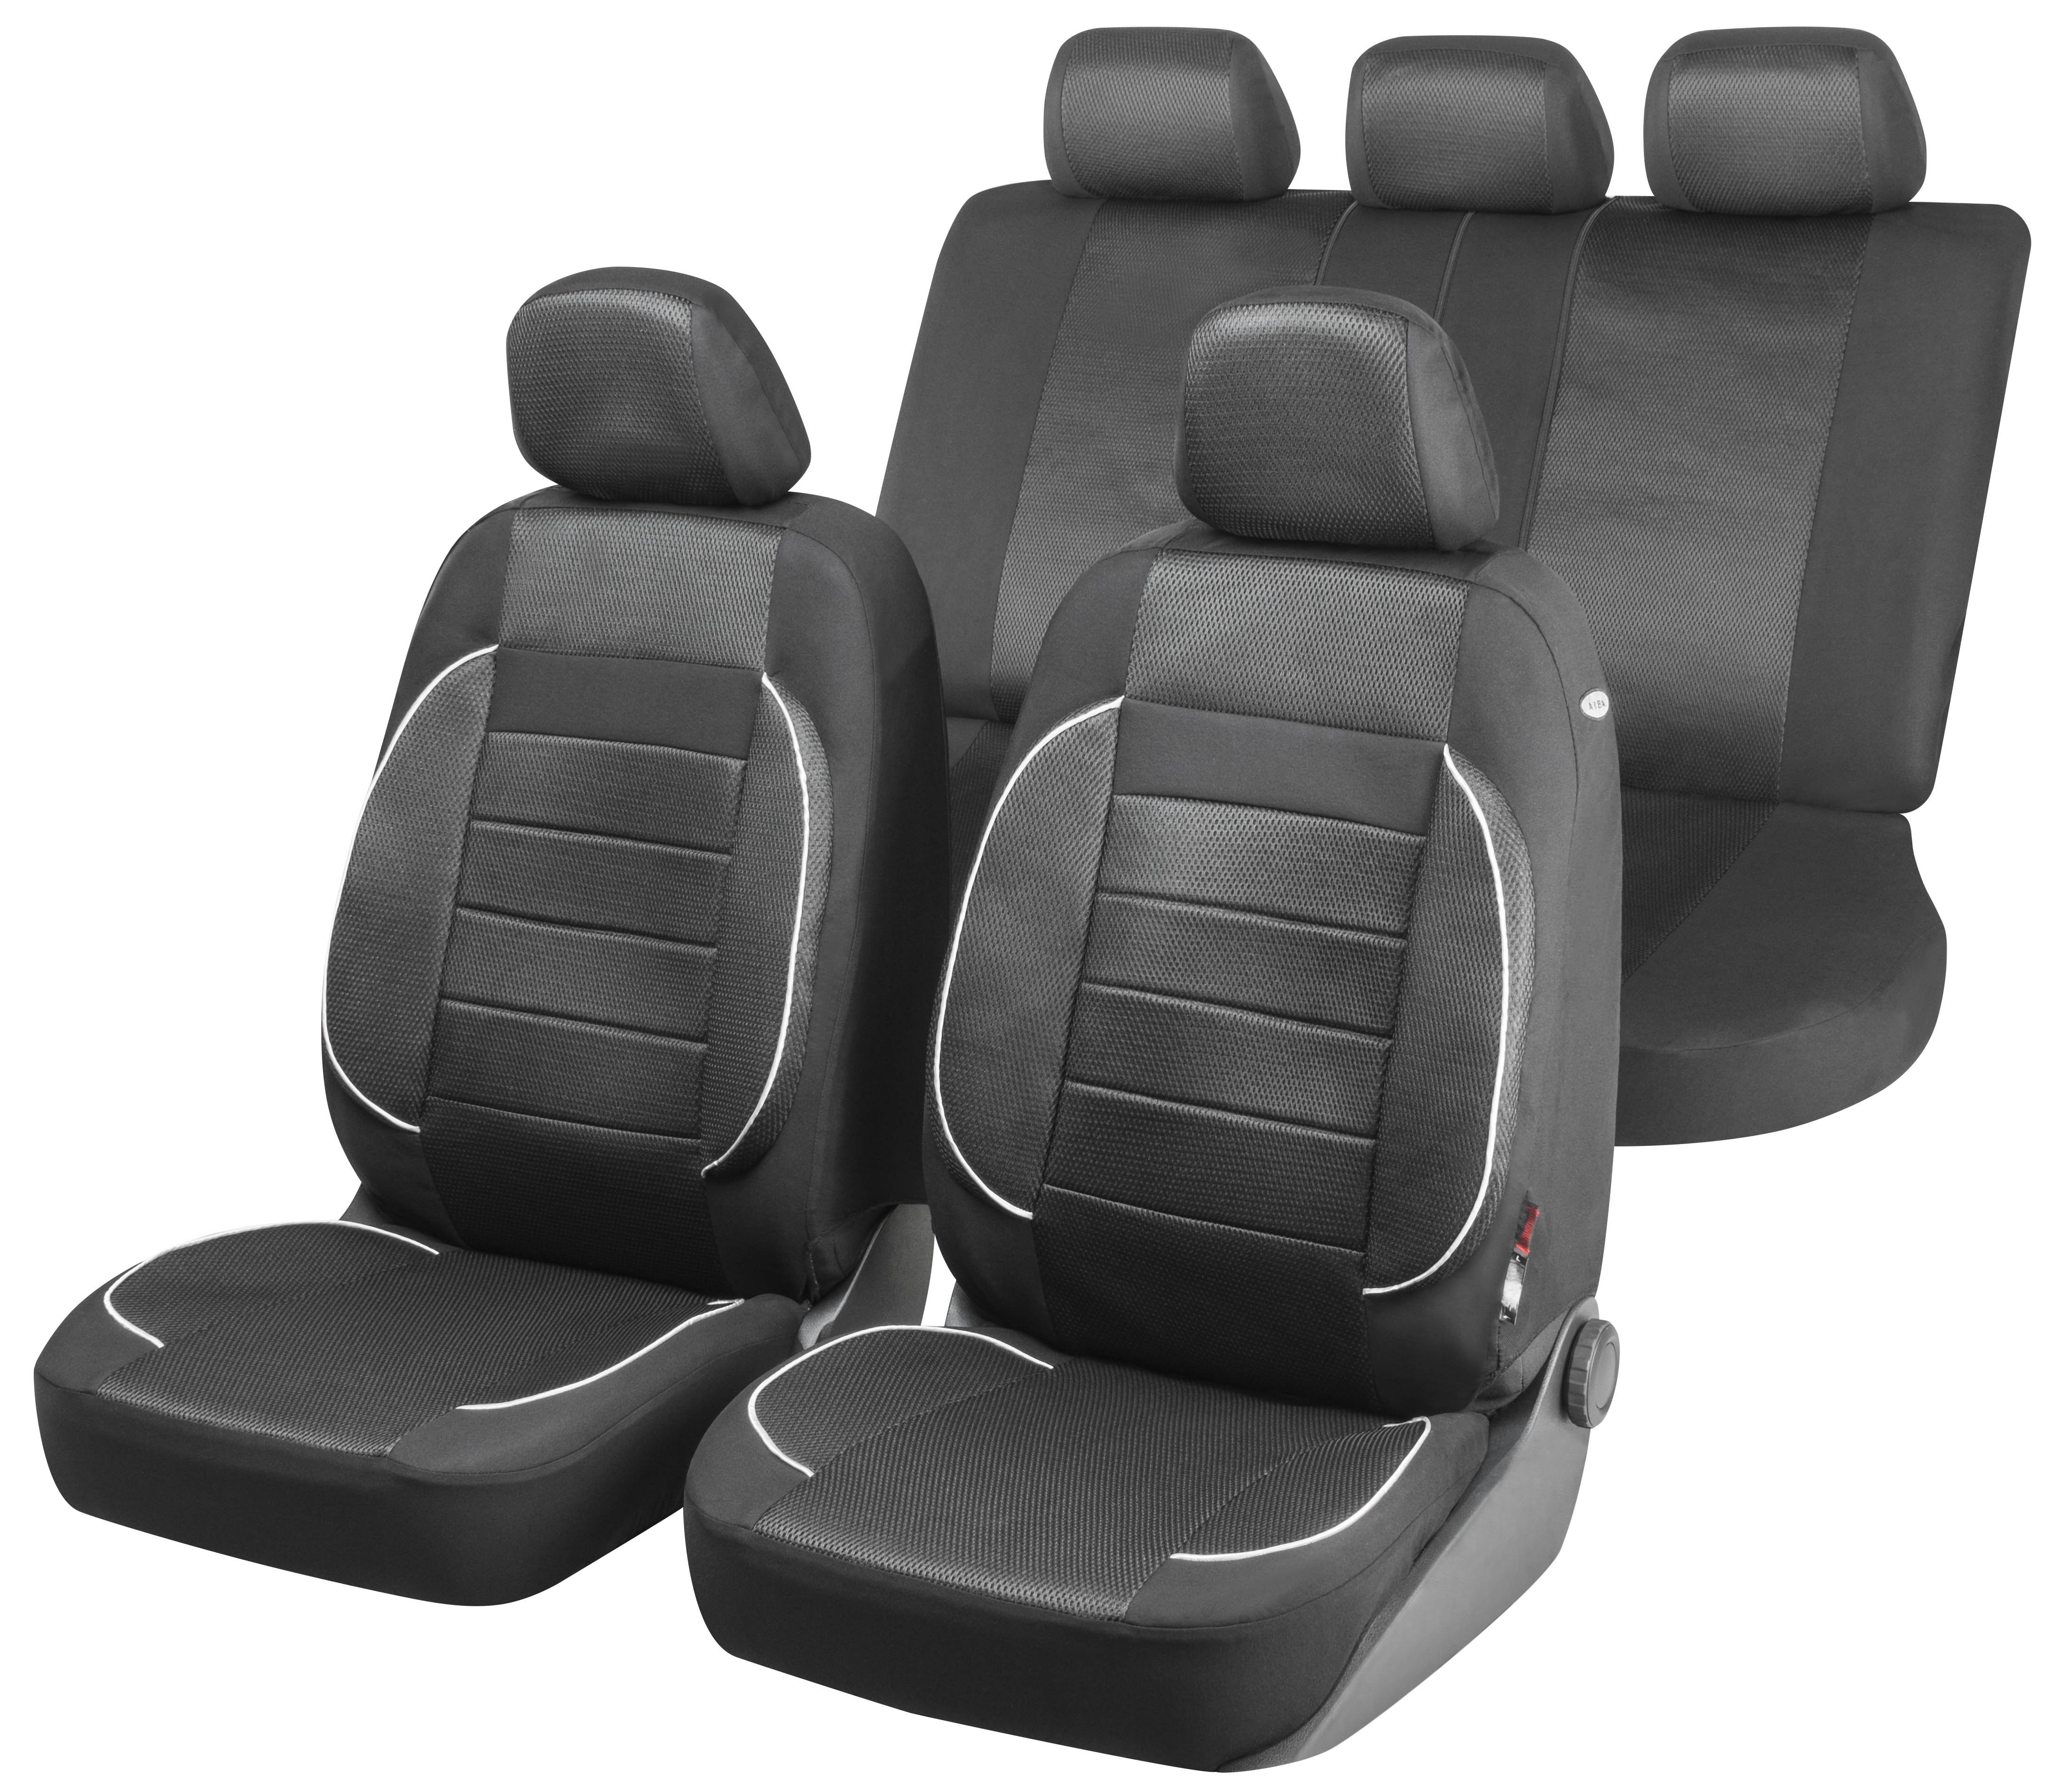 ZIPP IT Premium Rover car Seat covers complete set with zipper system